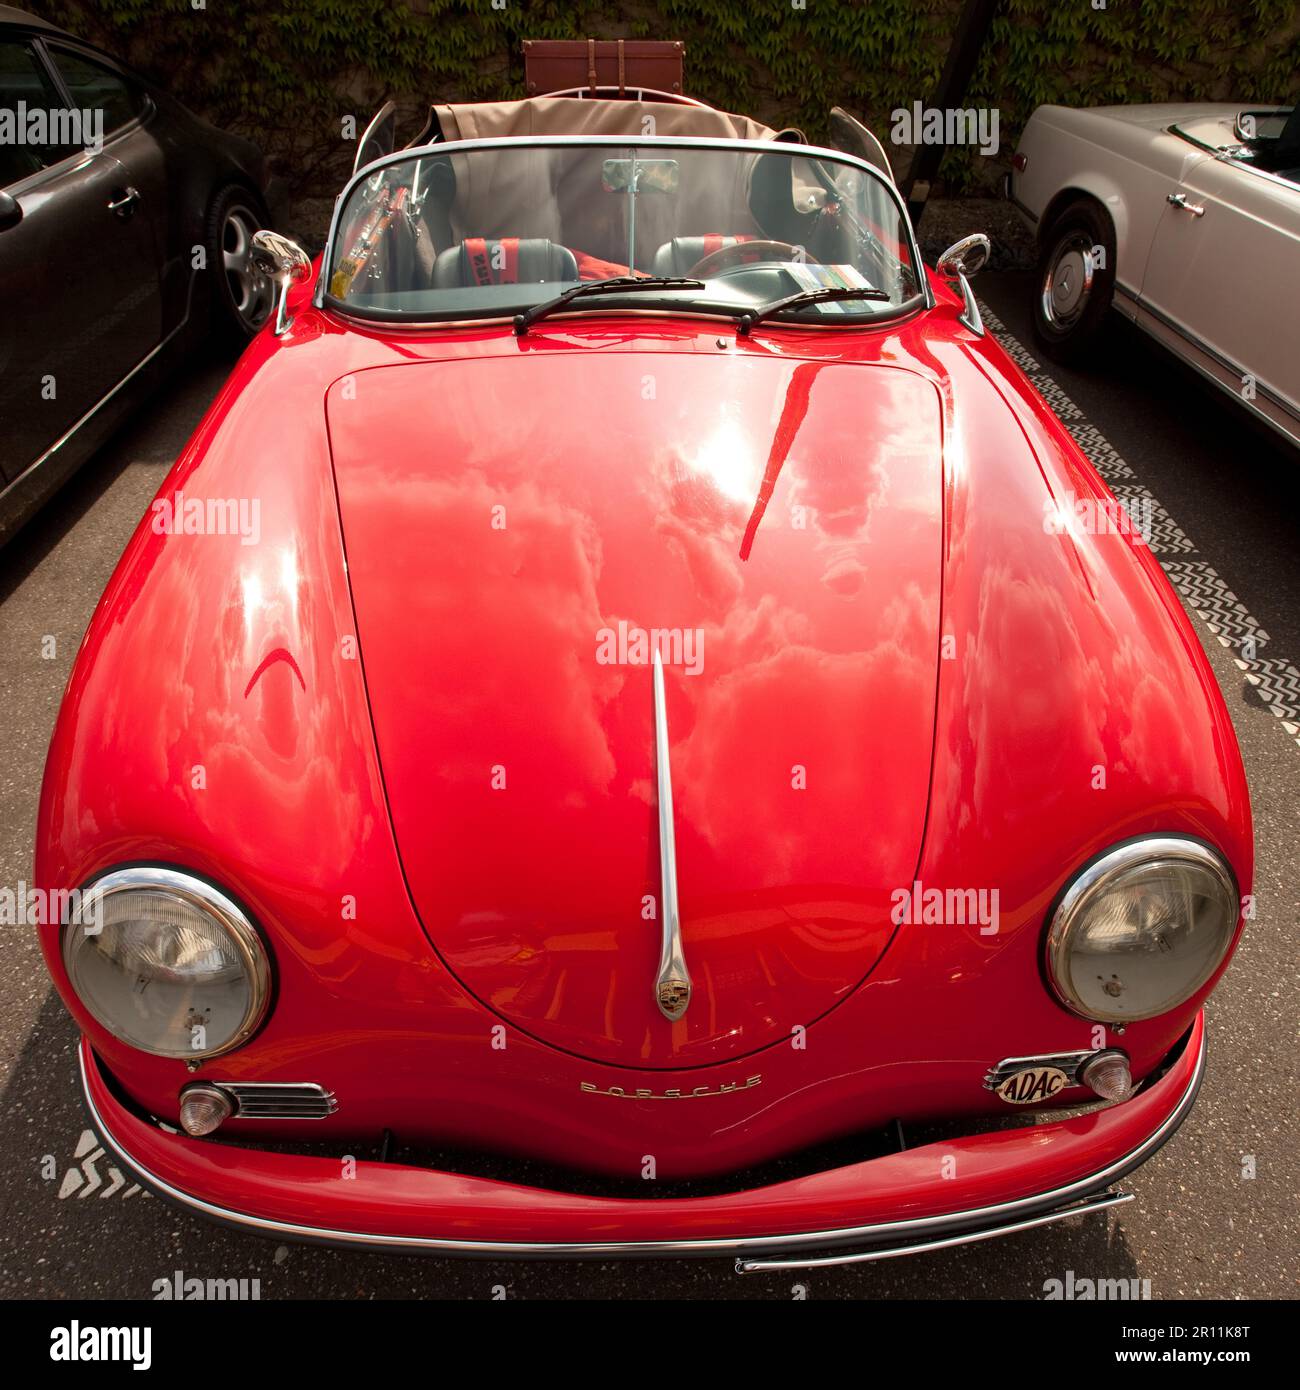 Vintage Porsche 356 Convertible, sports car, round headlights, driving open, red paint, shine, car care Stock Photo